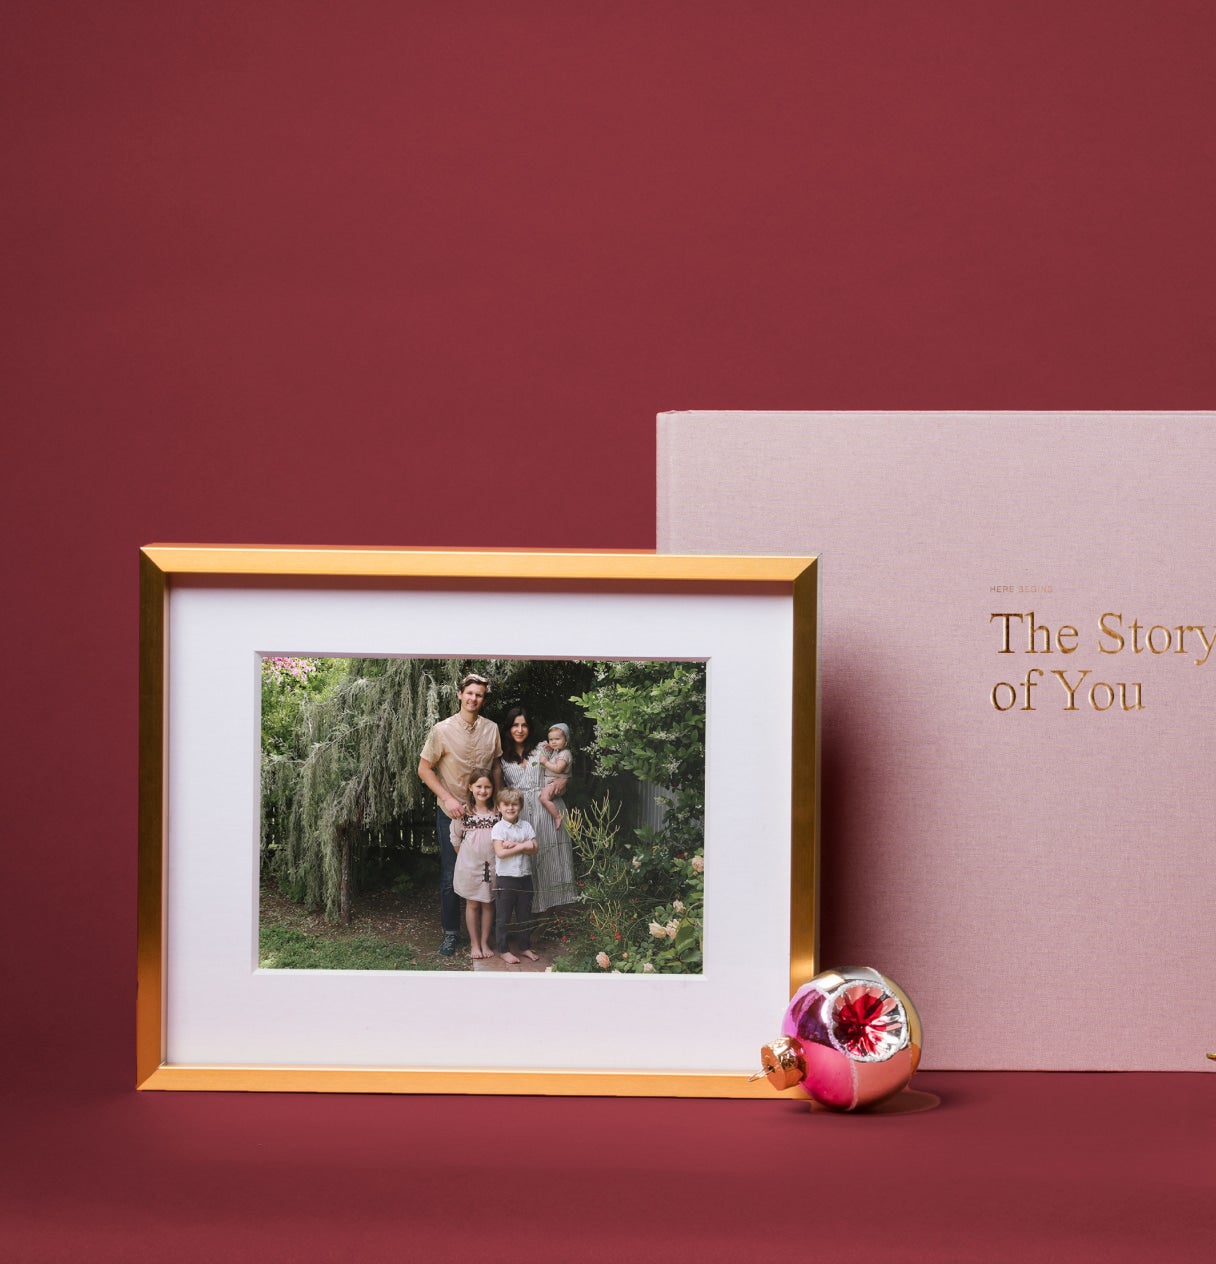 Image of Brass Metal Tabletop Frame and The Story of You Baby Book